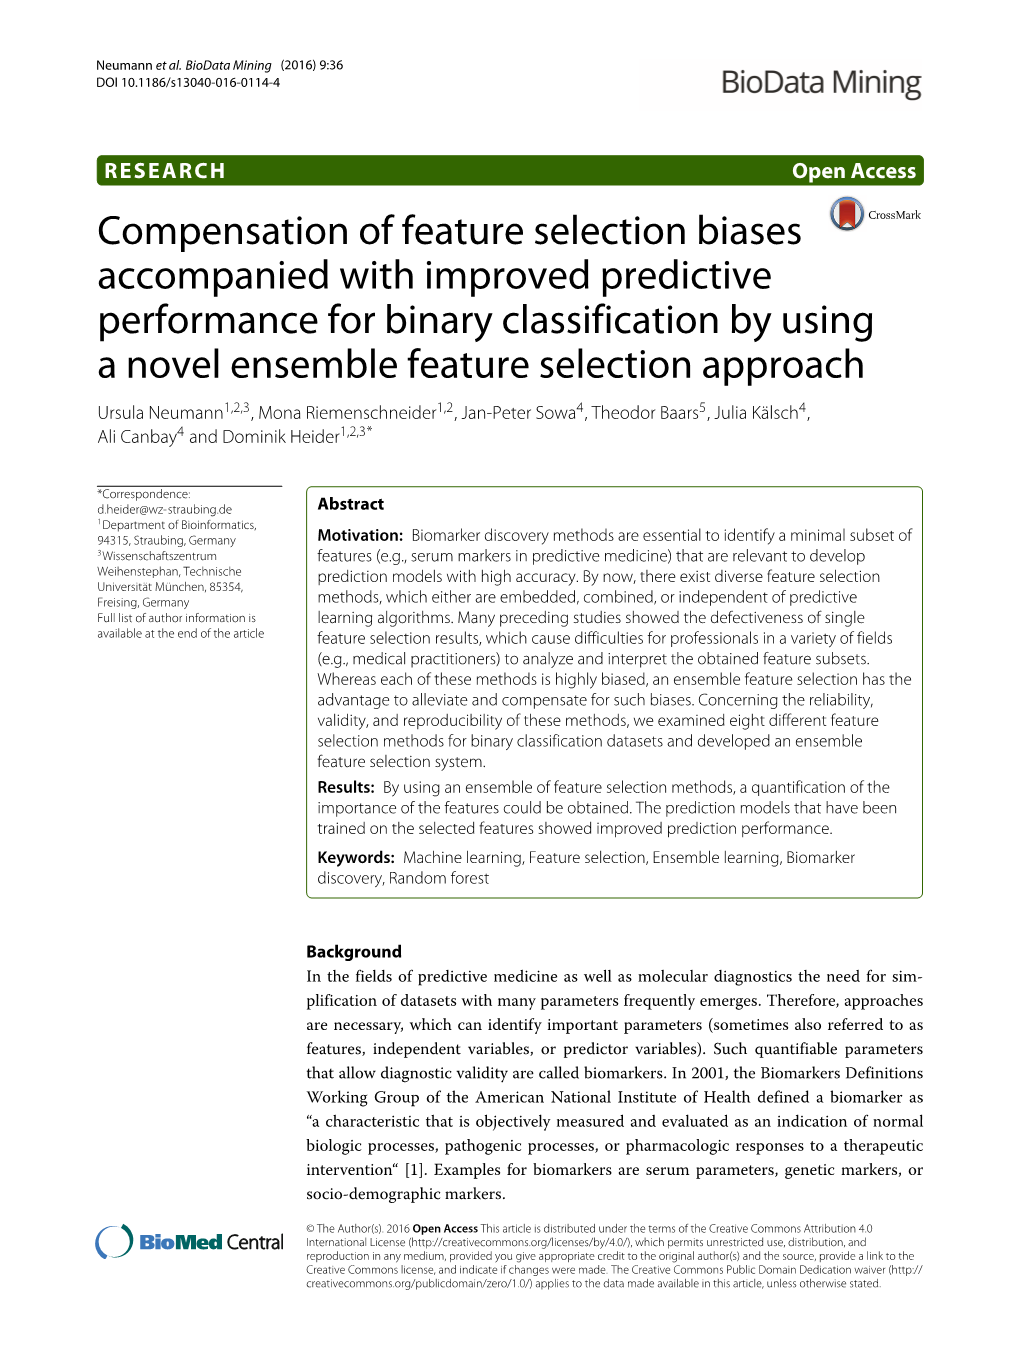 Compensation of Feature Selection Biases Accompanied with Improved